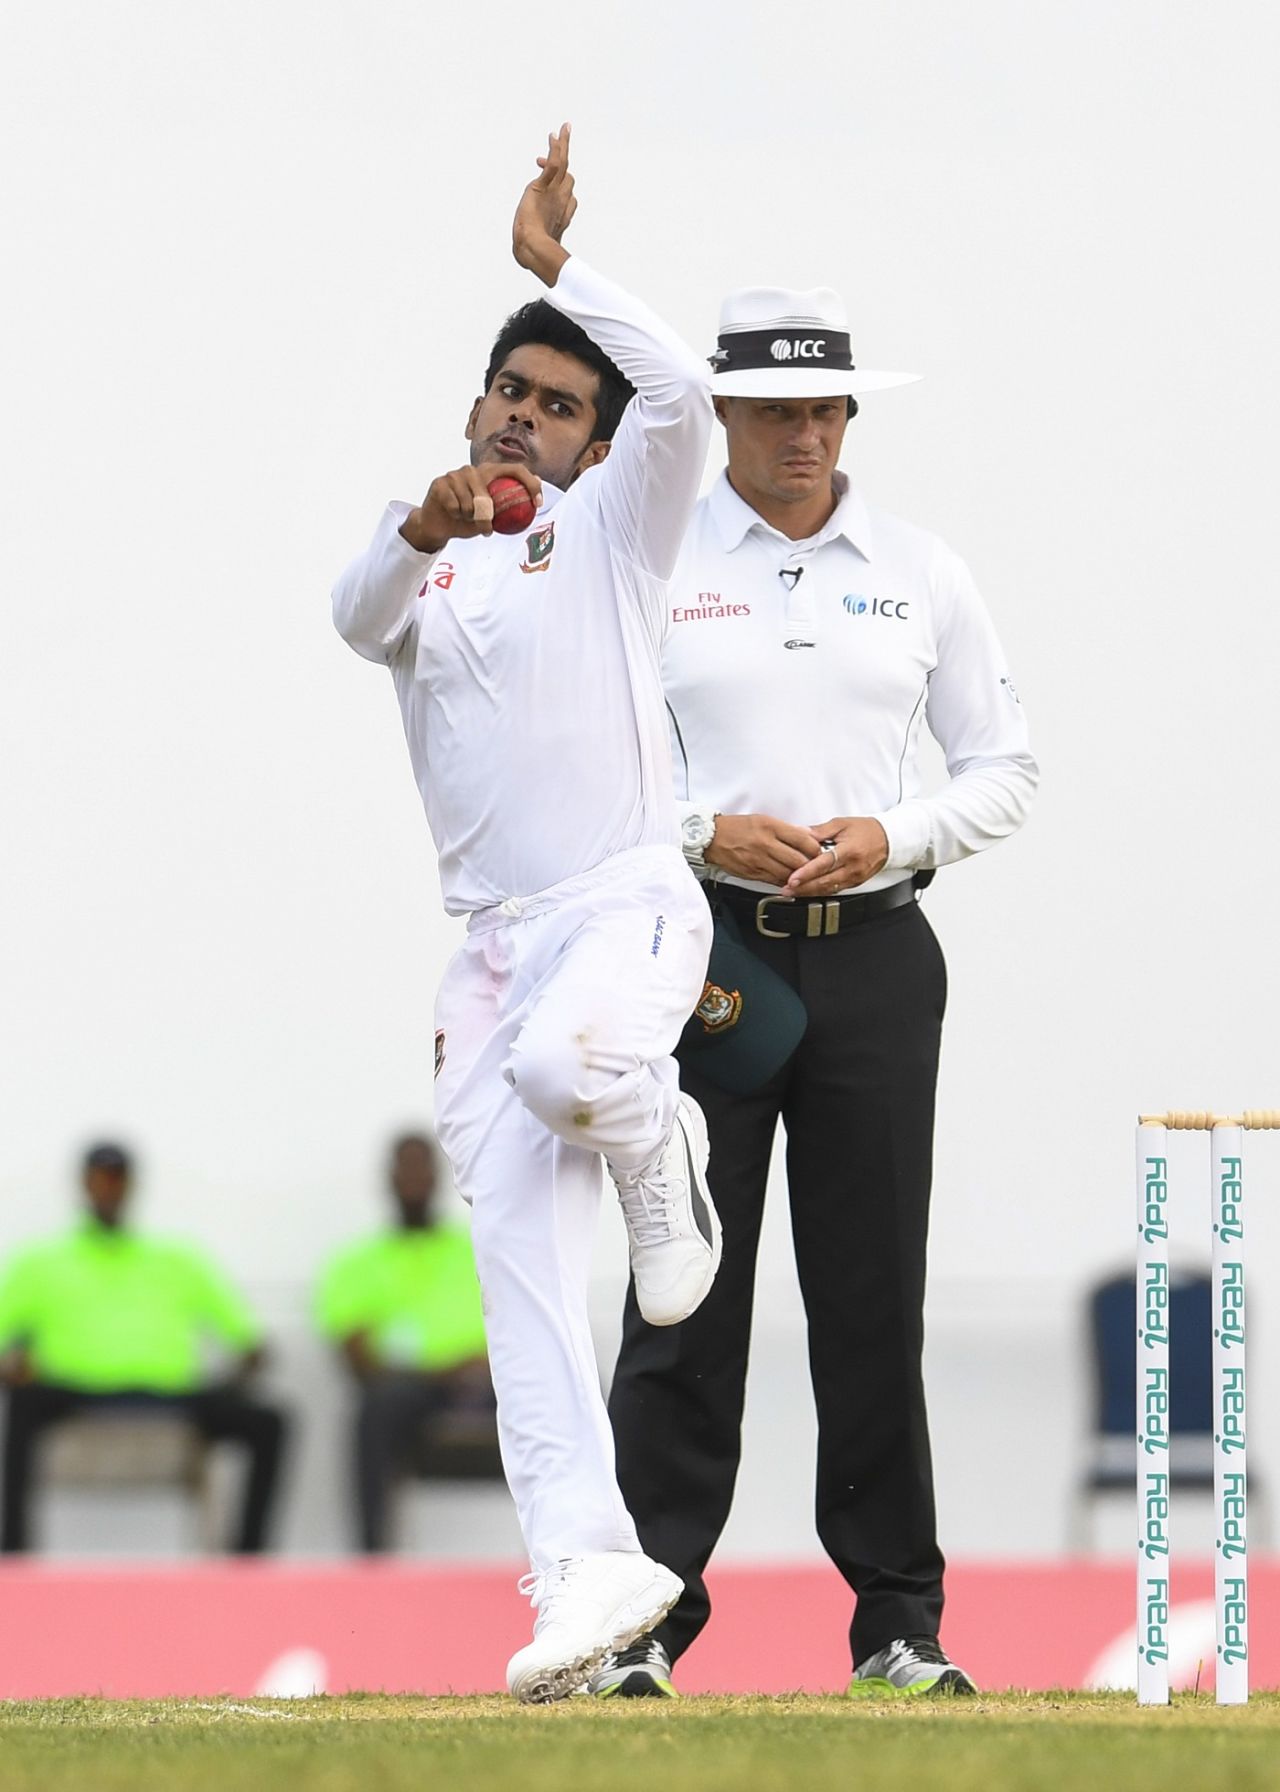 Mehidy Hasan became the joint fastest to 50 Test wickets for Bangladesh, getting there in 13 Tests, West Indies v Bangladesh, 1st Test, North Sound, 2nd day, July 5, 2018